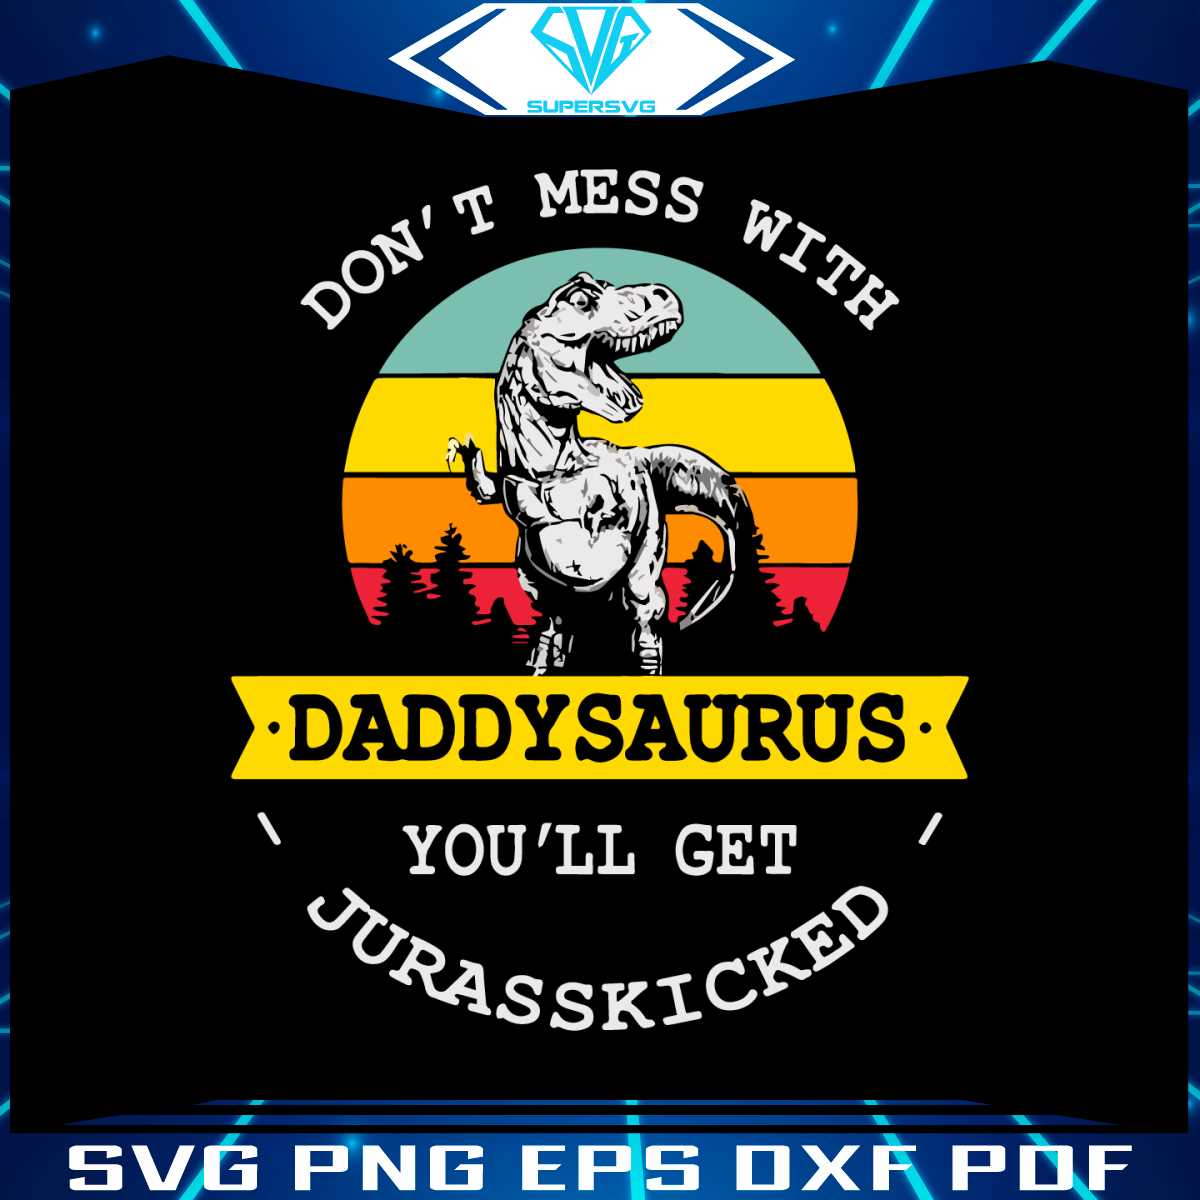 dont-mess-with-daddysaurus-you-will-get-jurasskicked-svg